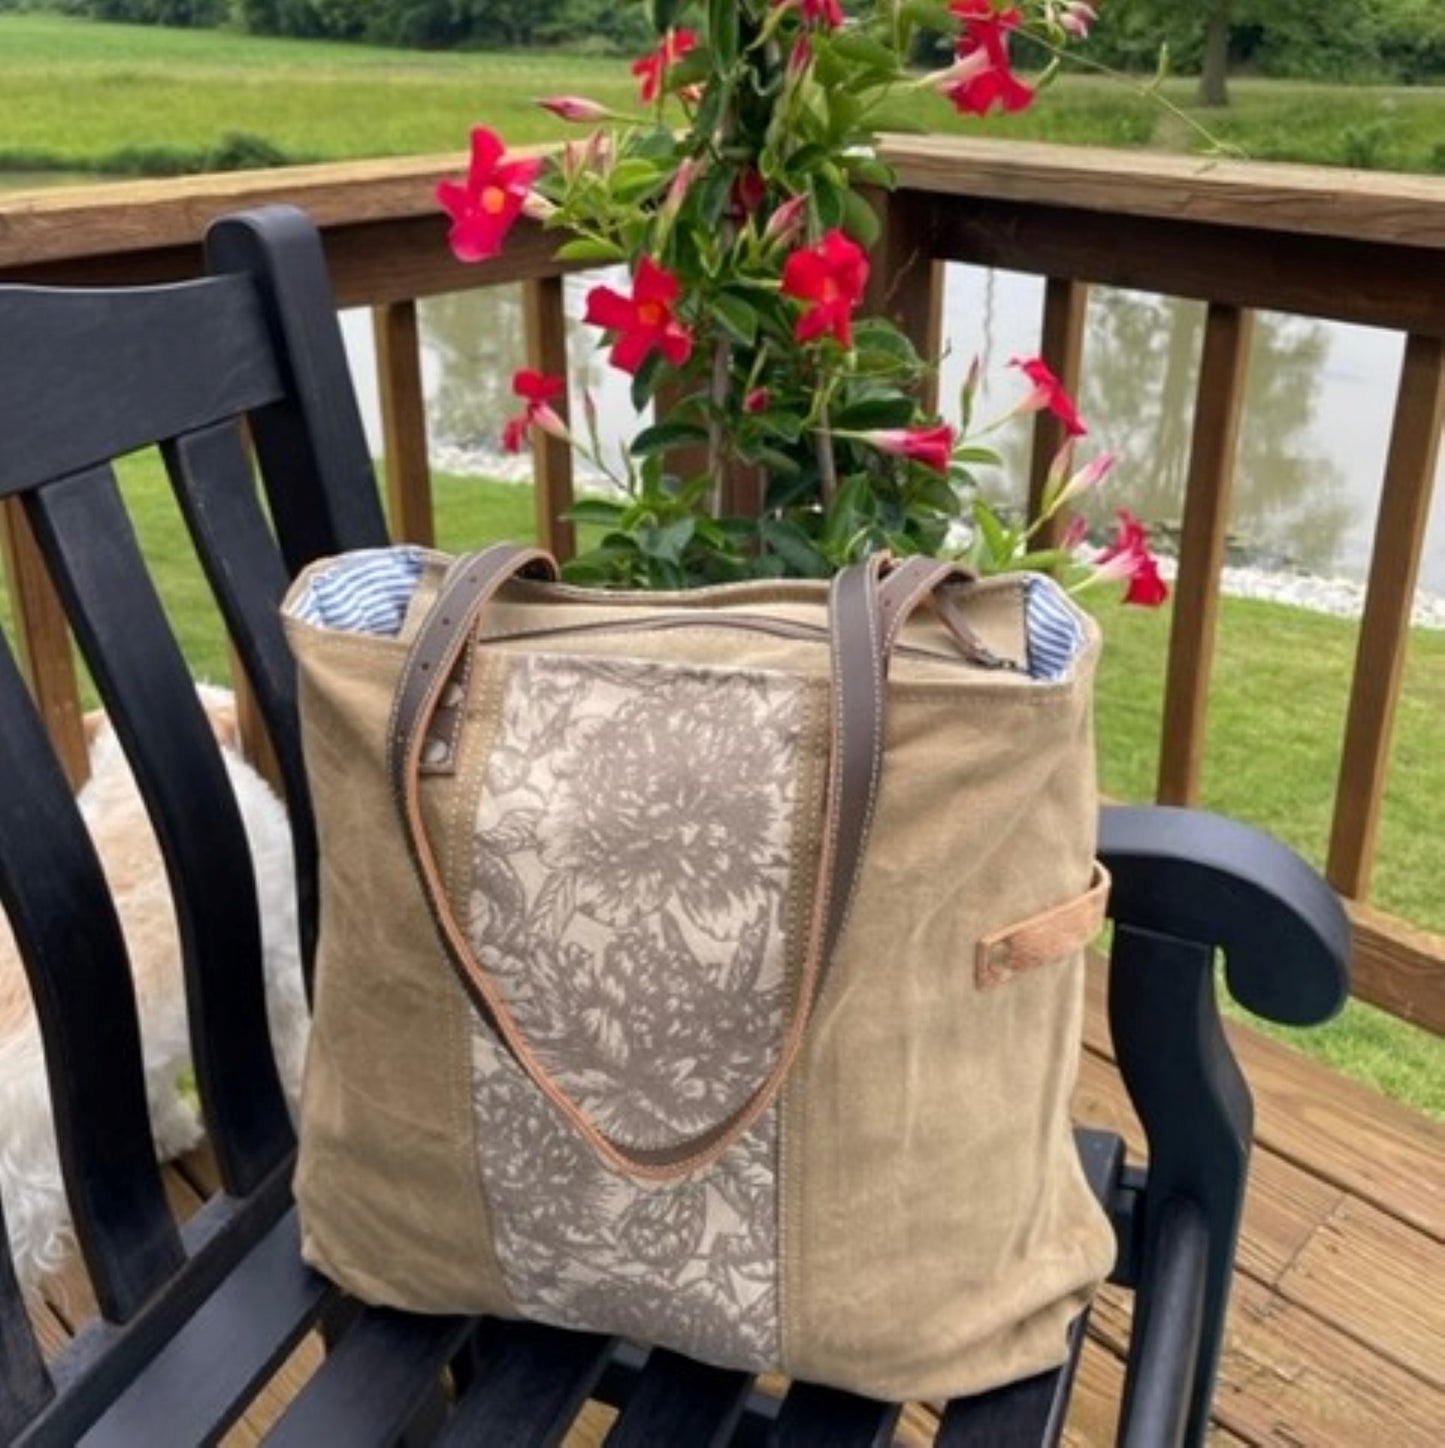 Vintage Flower Cream and Khaki Tote made of UpCycled Military Canvas